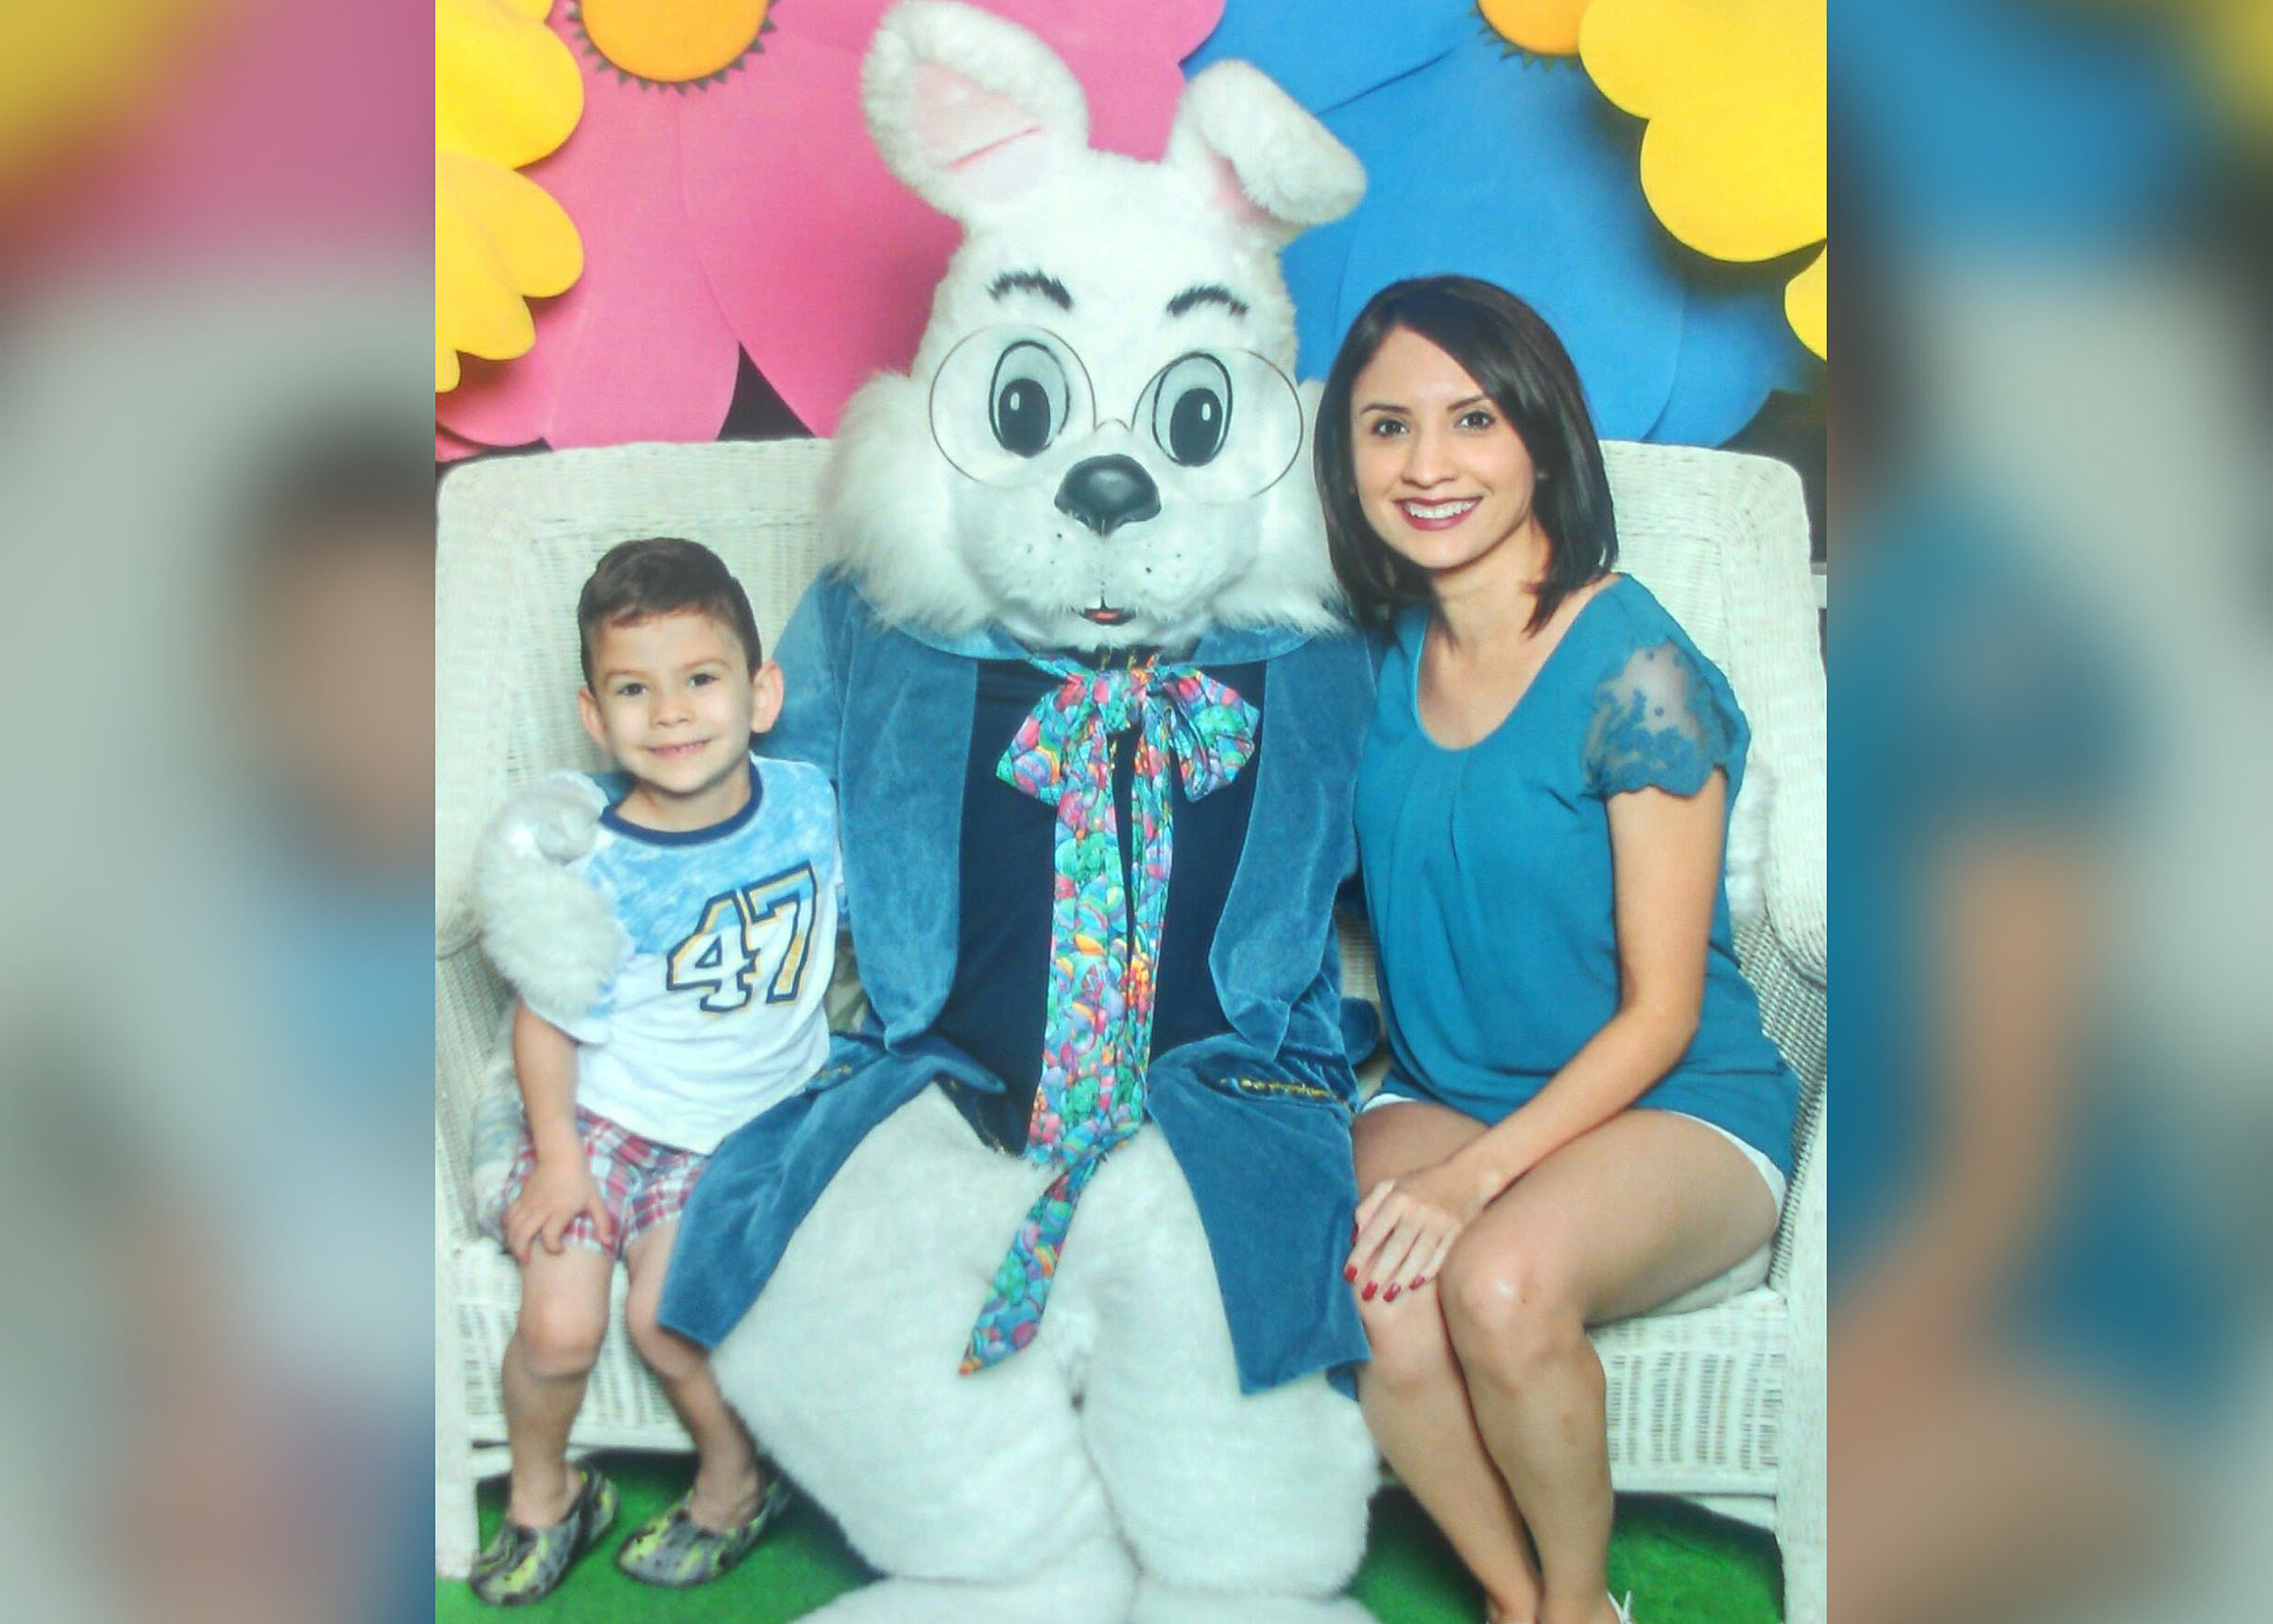 The Easter Bunny Is Here! Find Out Where To Get Easter Photos